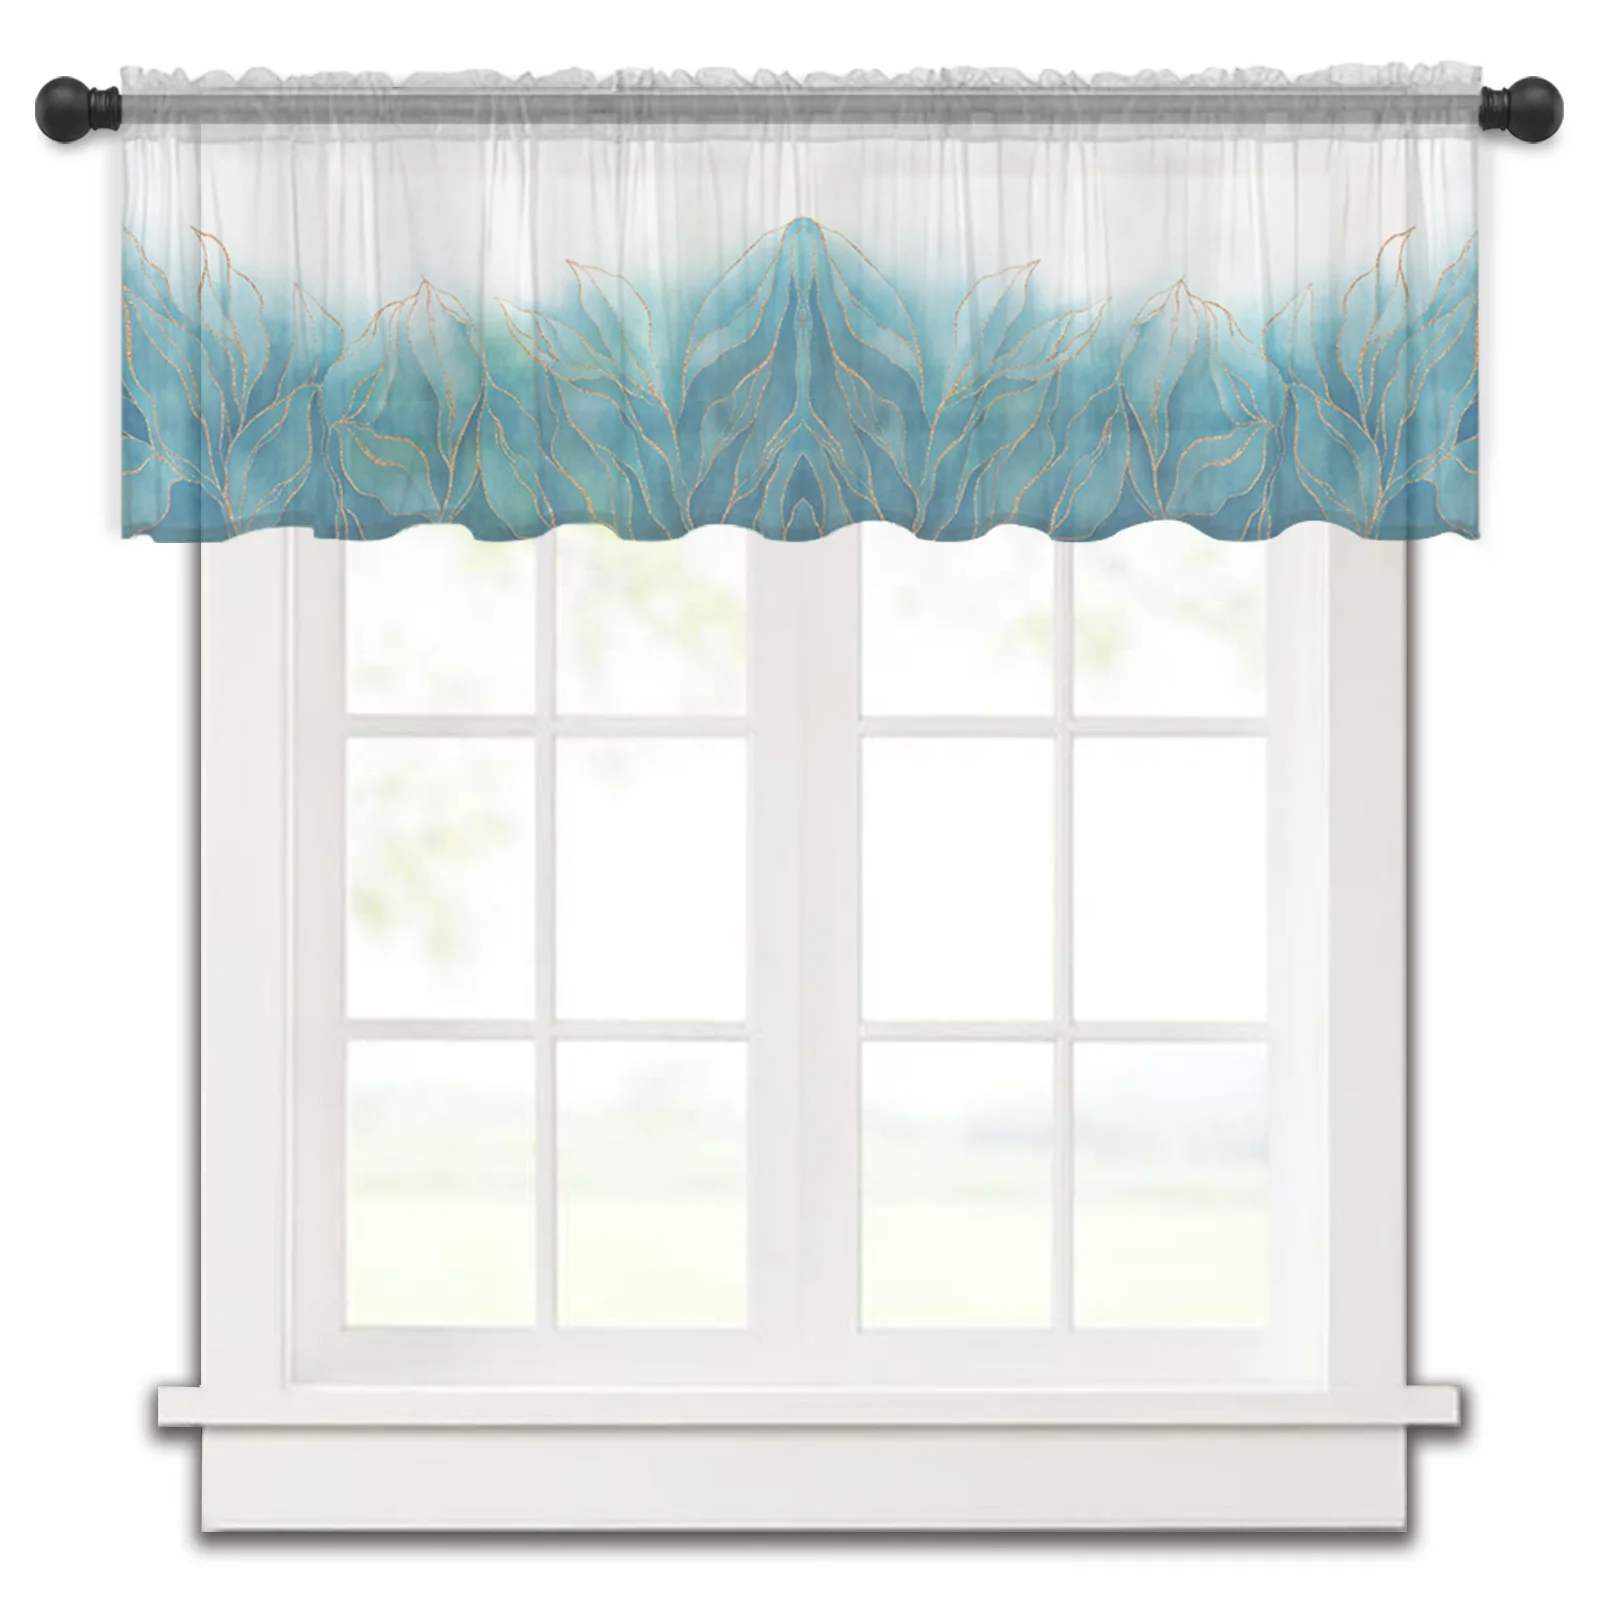 

Geometric Abstract Gradient Leaves Teal Kitchen Curtains Tulle Sheer Short Curtain Bedroom Living Room Home Decor Voile Drapes